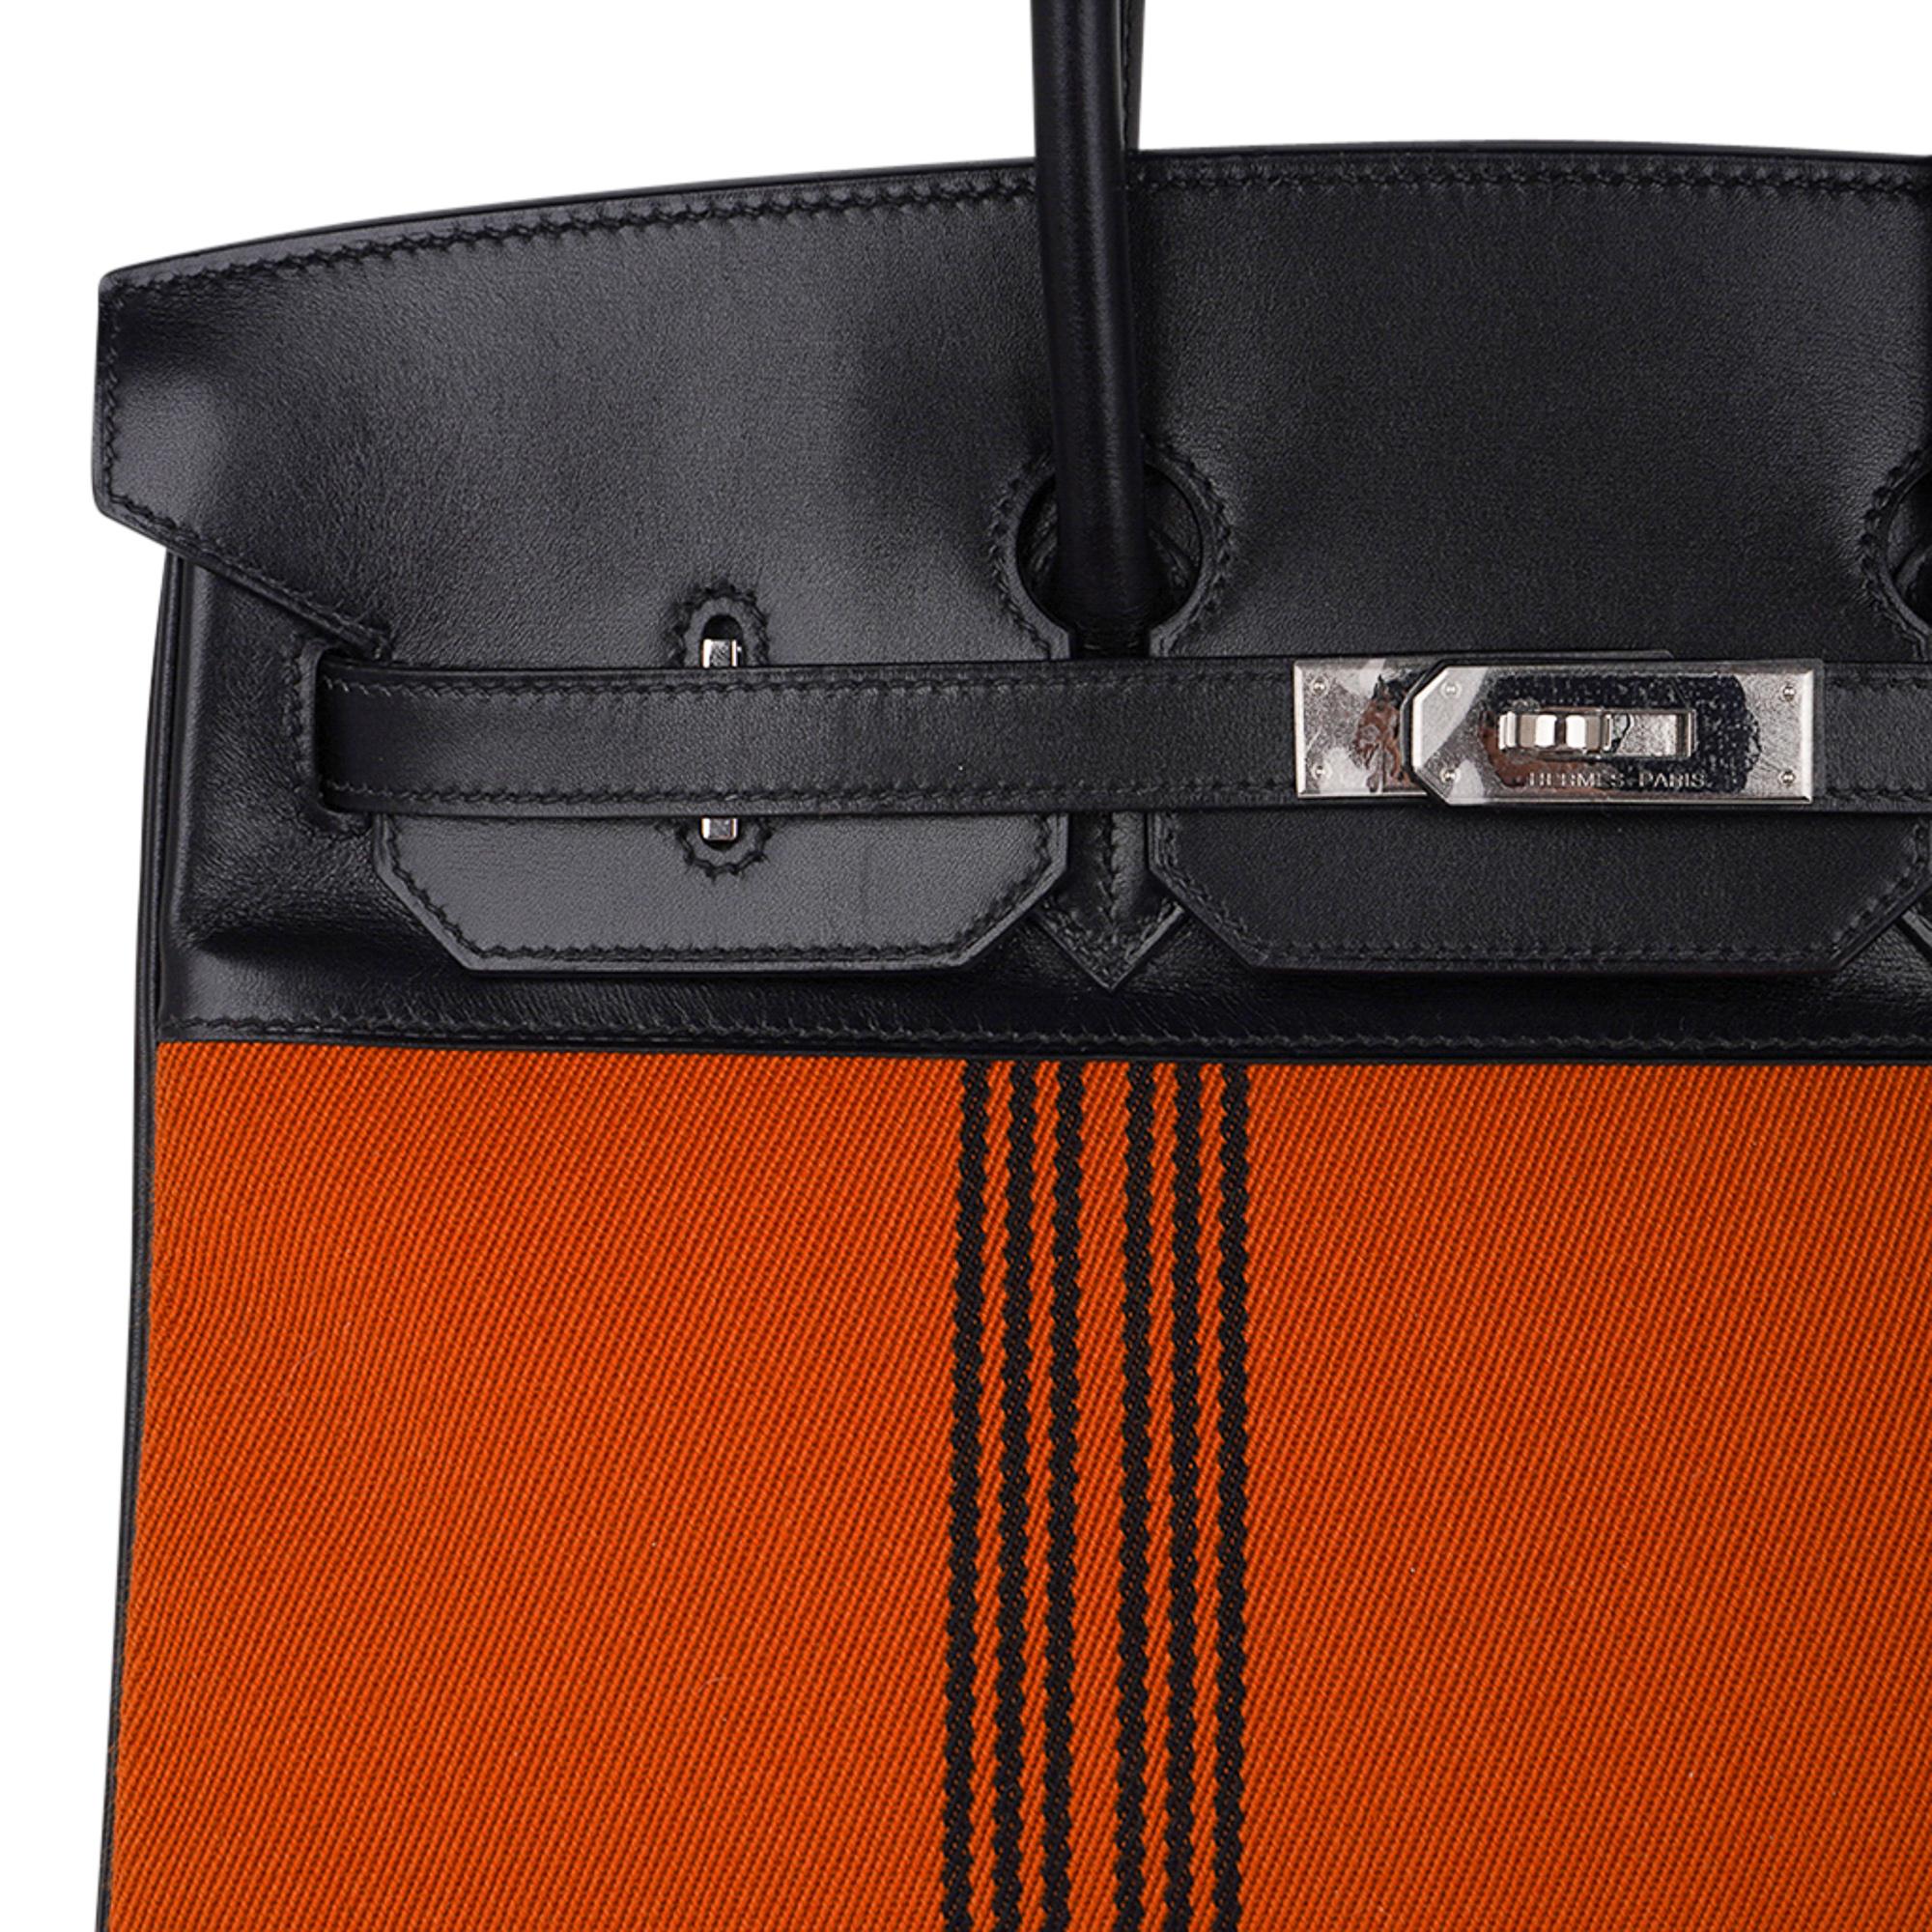 Mightychic offers a very rare Limited Edition Hermes 35 Birkin Potamus featured in Orange canvas and Black Box leather.
The rich Orange body features 7 Black vertical lines.
Crest, corners, sides and handles are polished Box leather.
A modern take